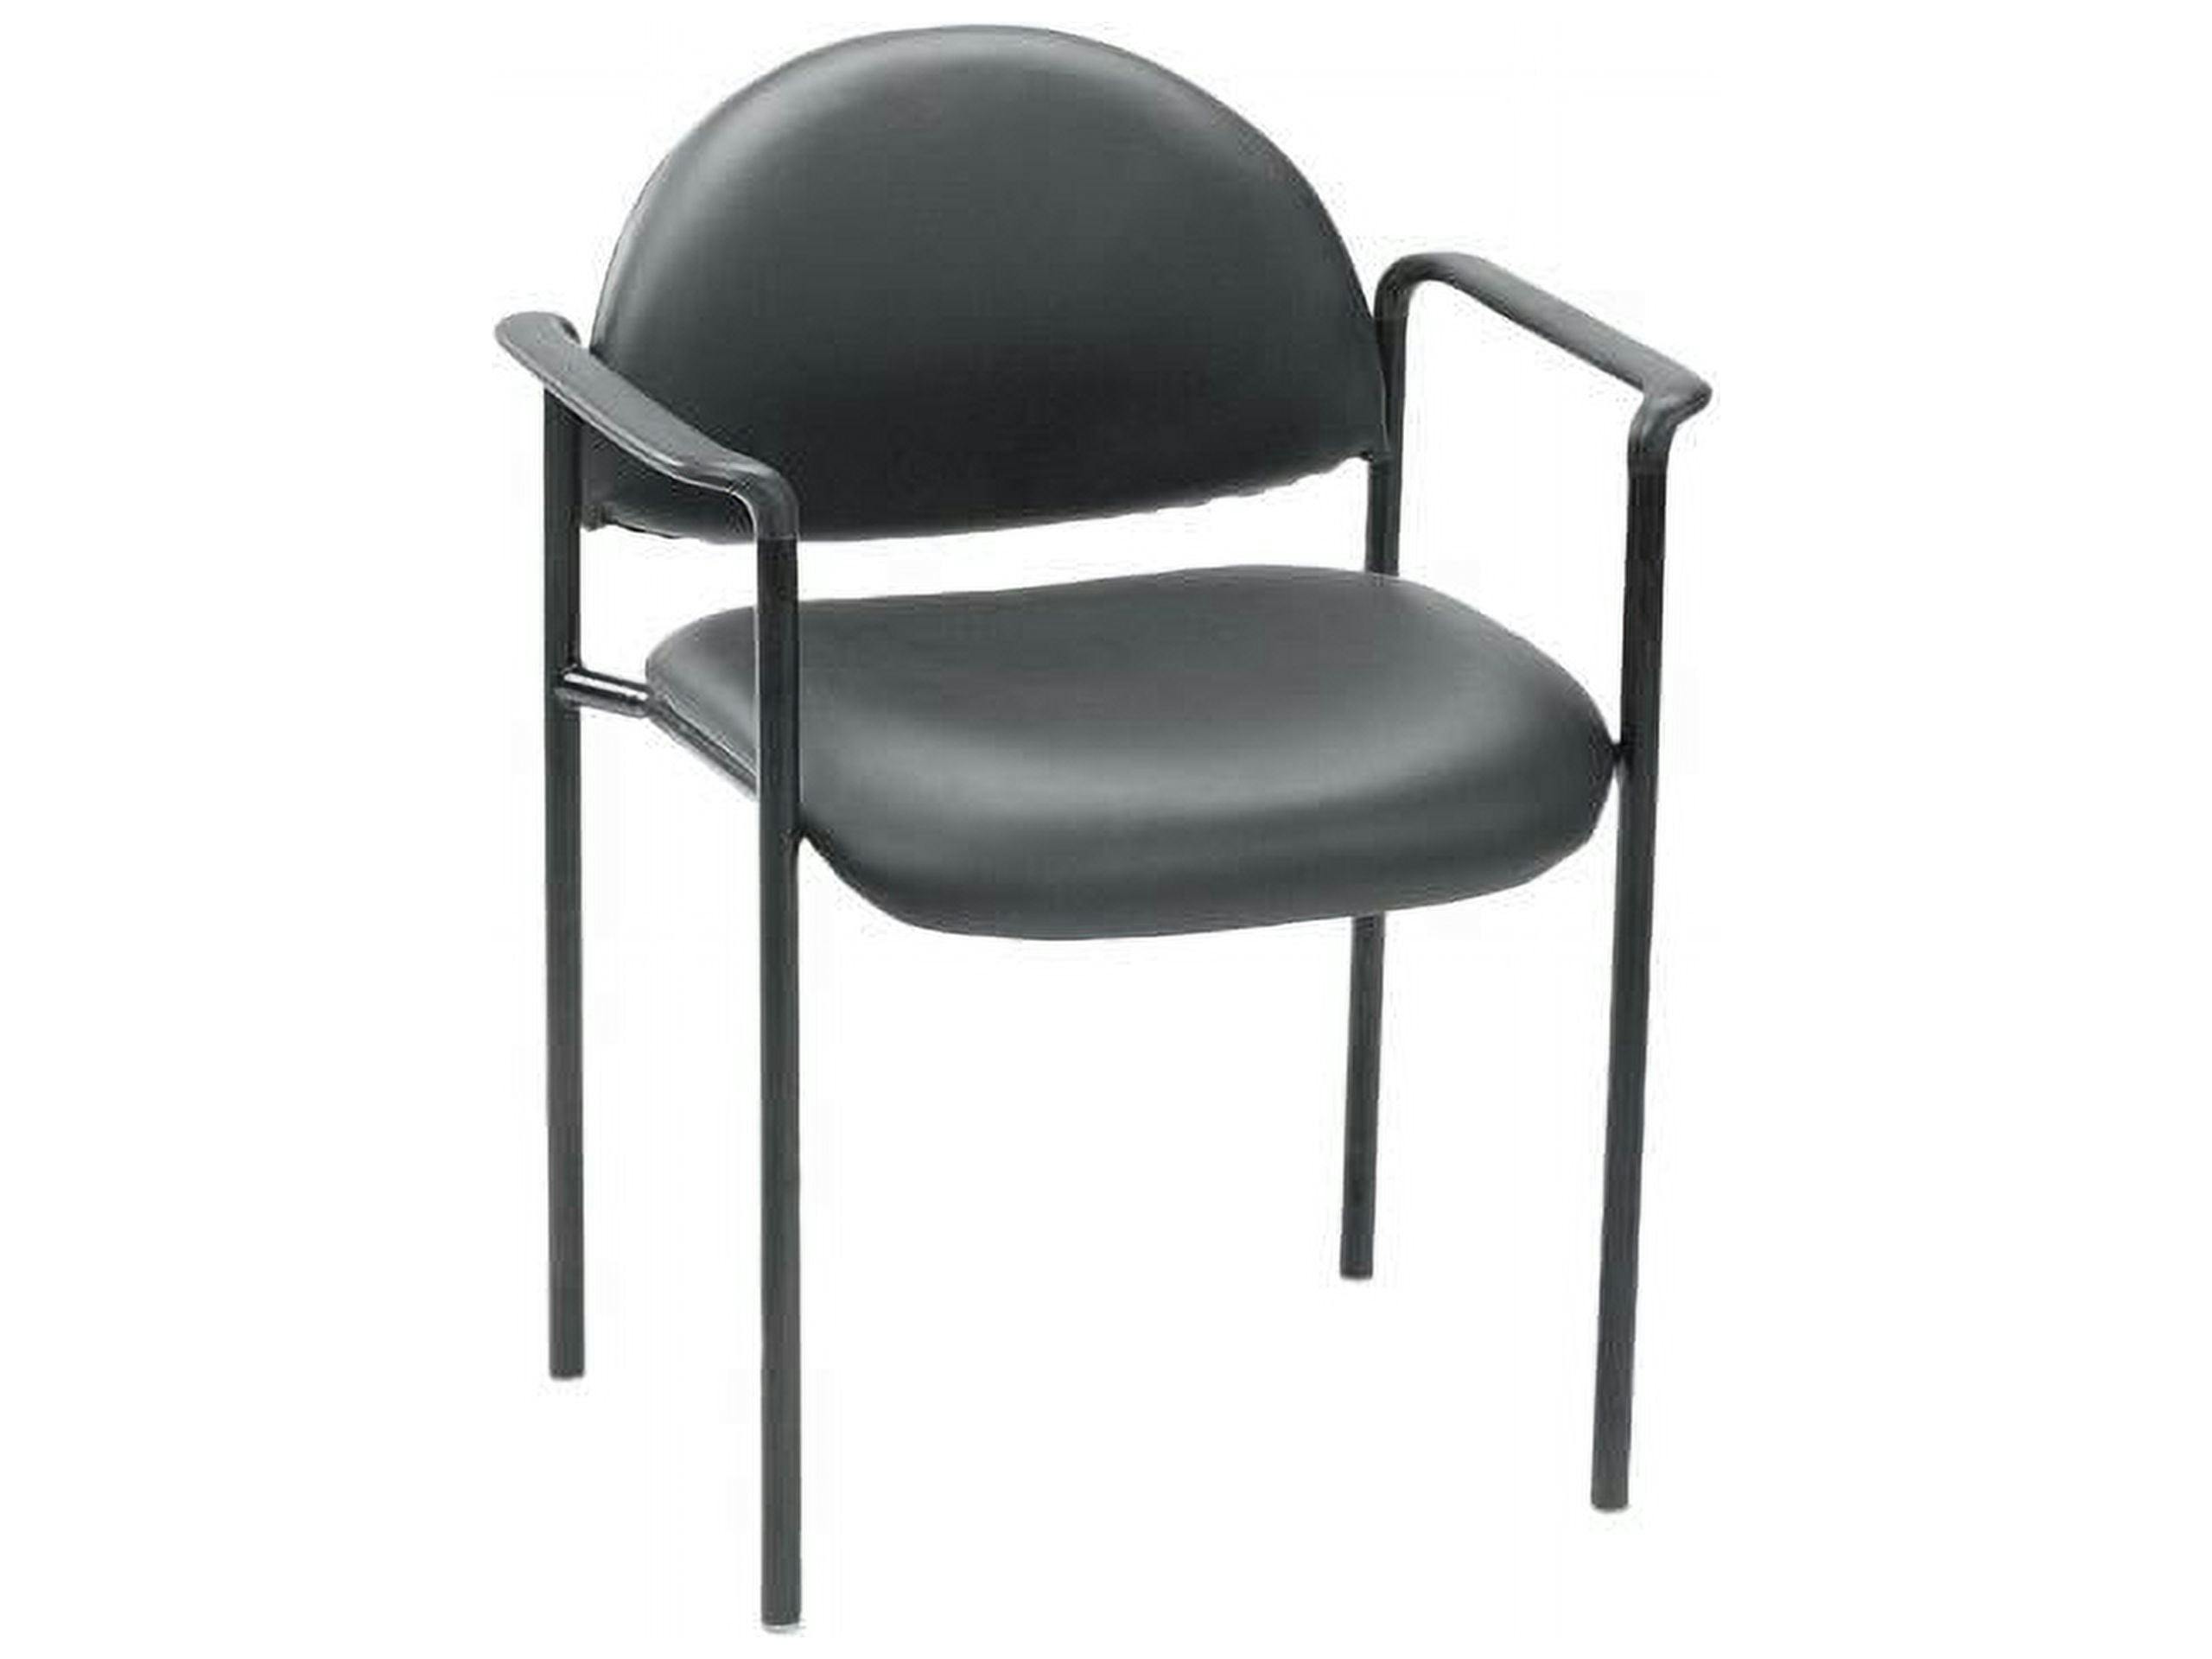 Contemporary Black Caressoft Stacking Chair with Metal Frame